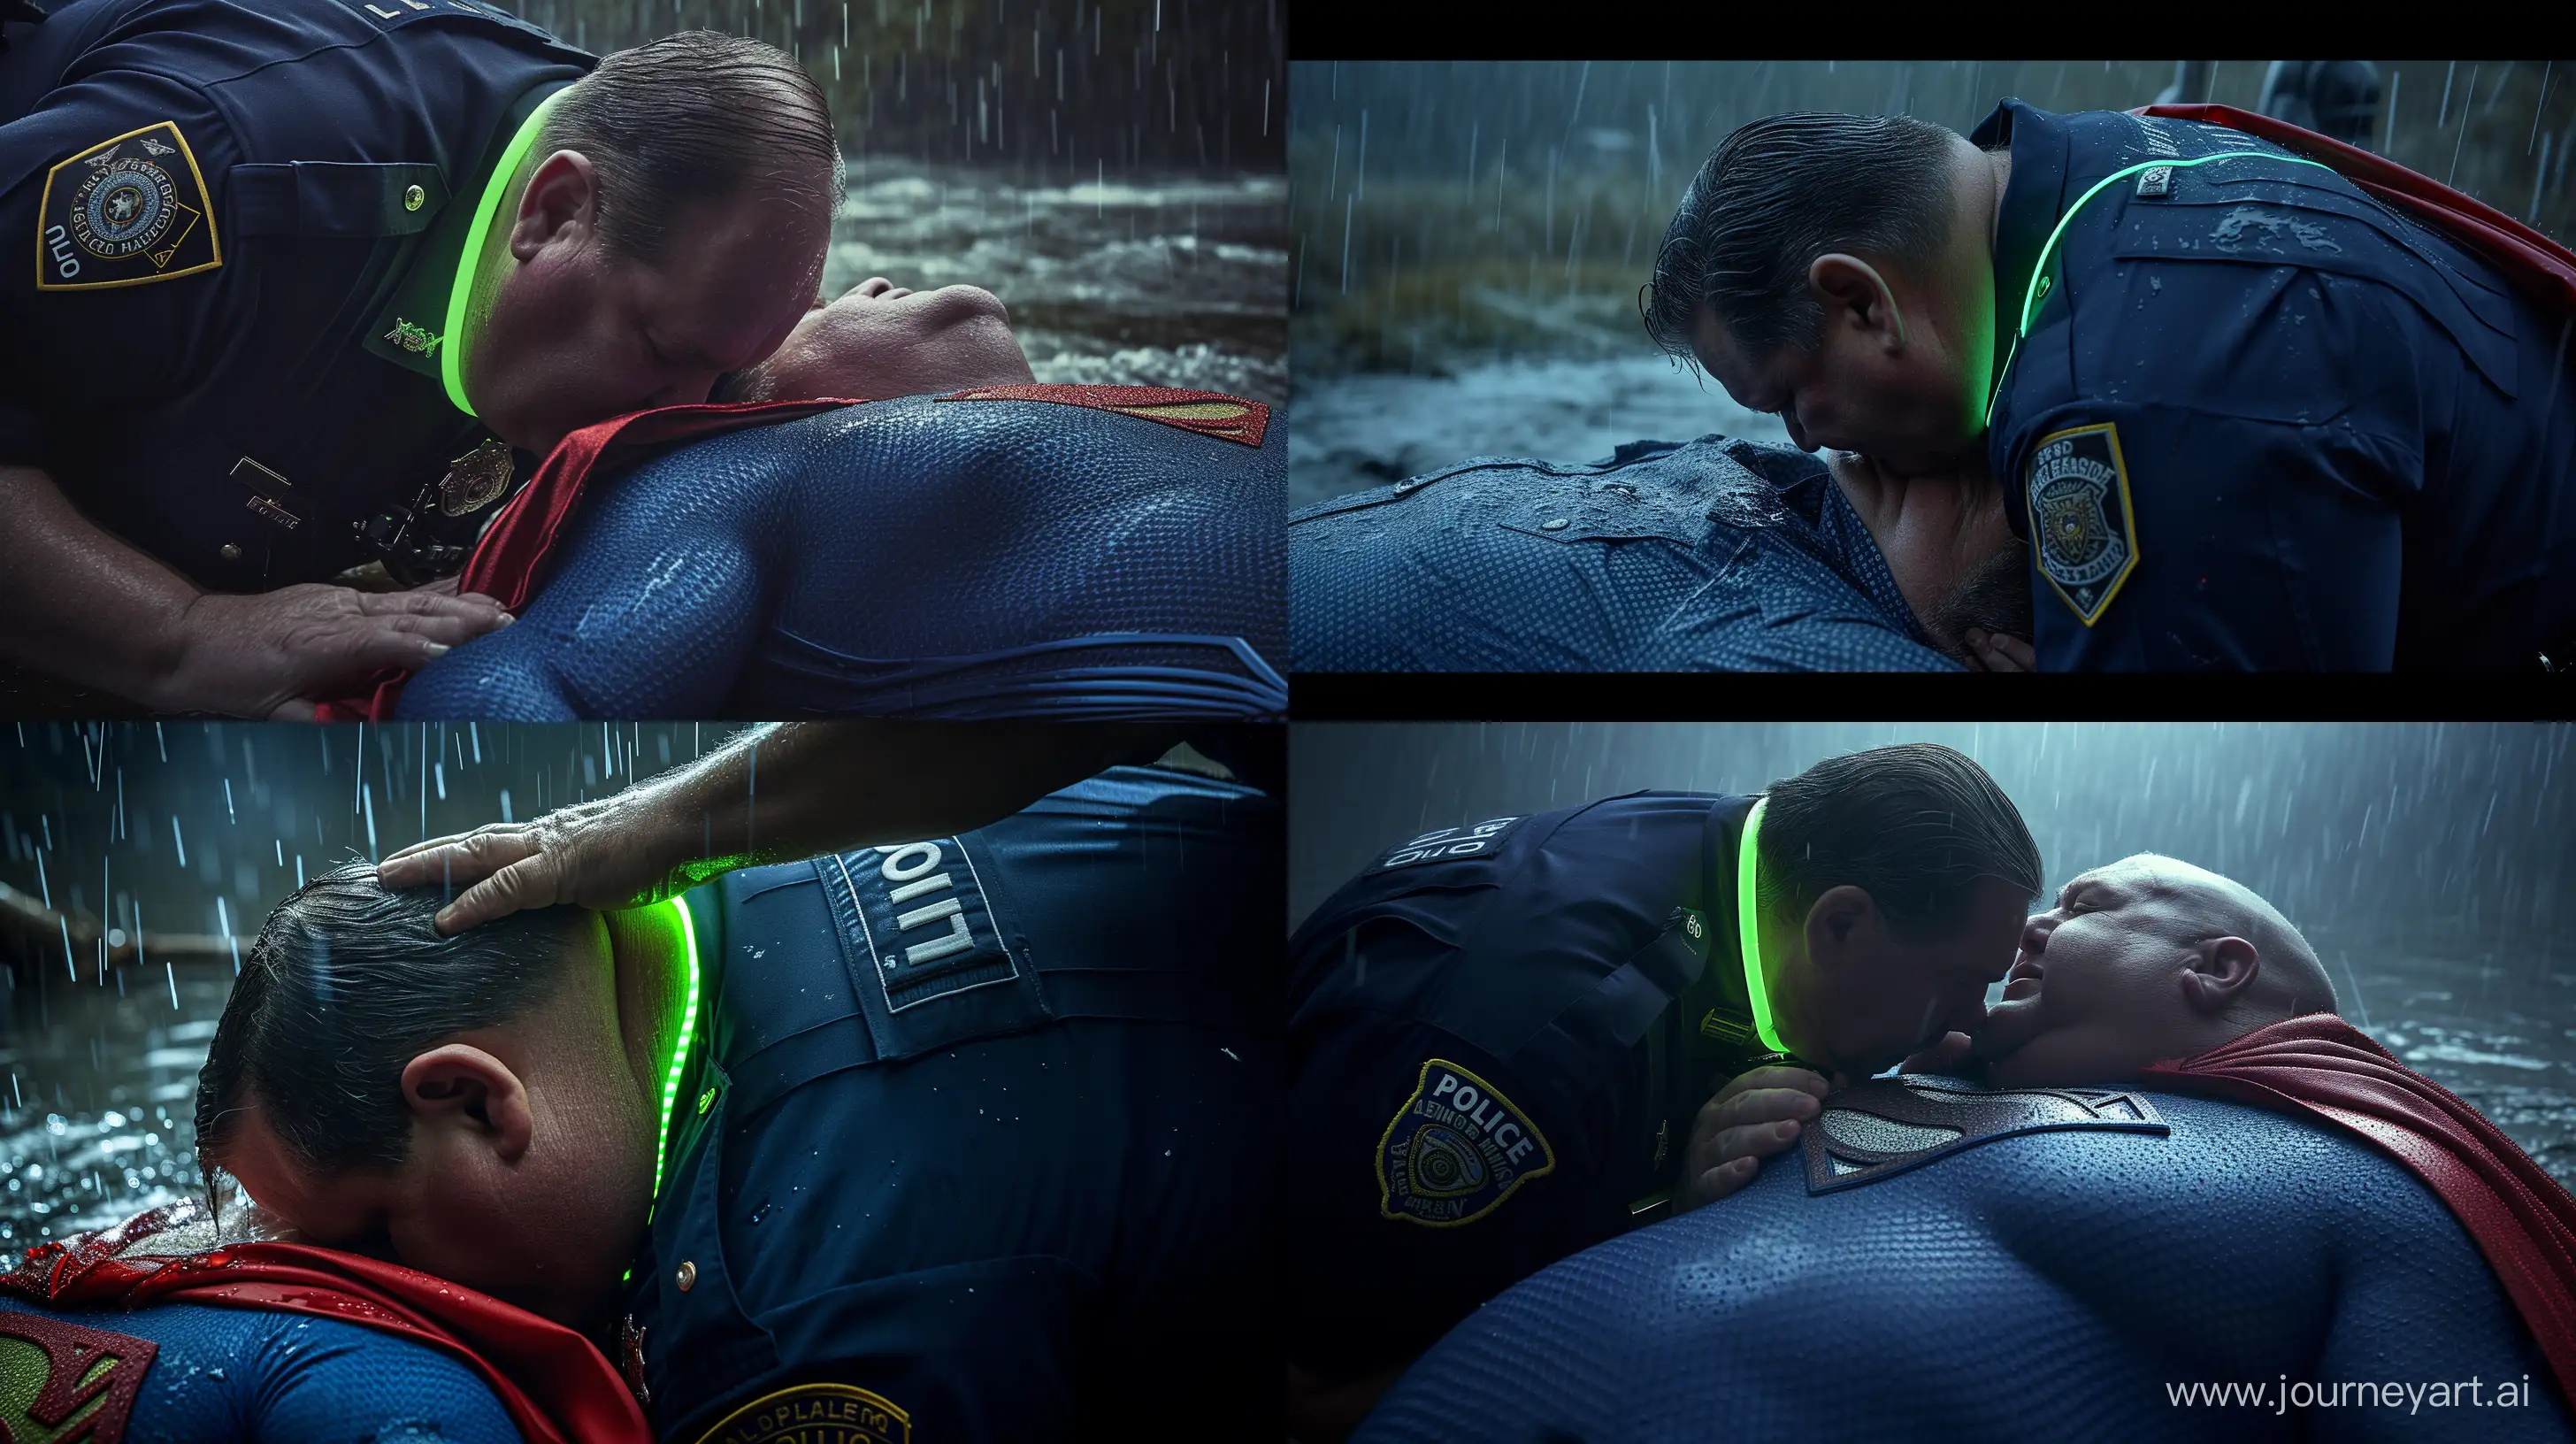 Elderly-Police-Officer-Fastens-Glowing-Green-Dog-Collar-on-Superman-Amidst-Rain-by-the-River